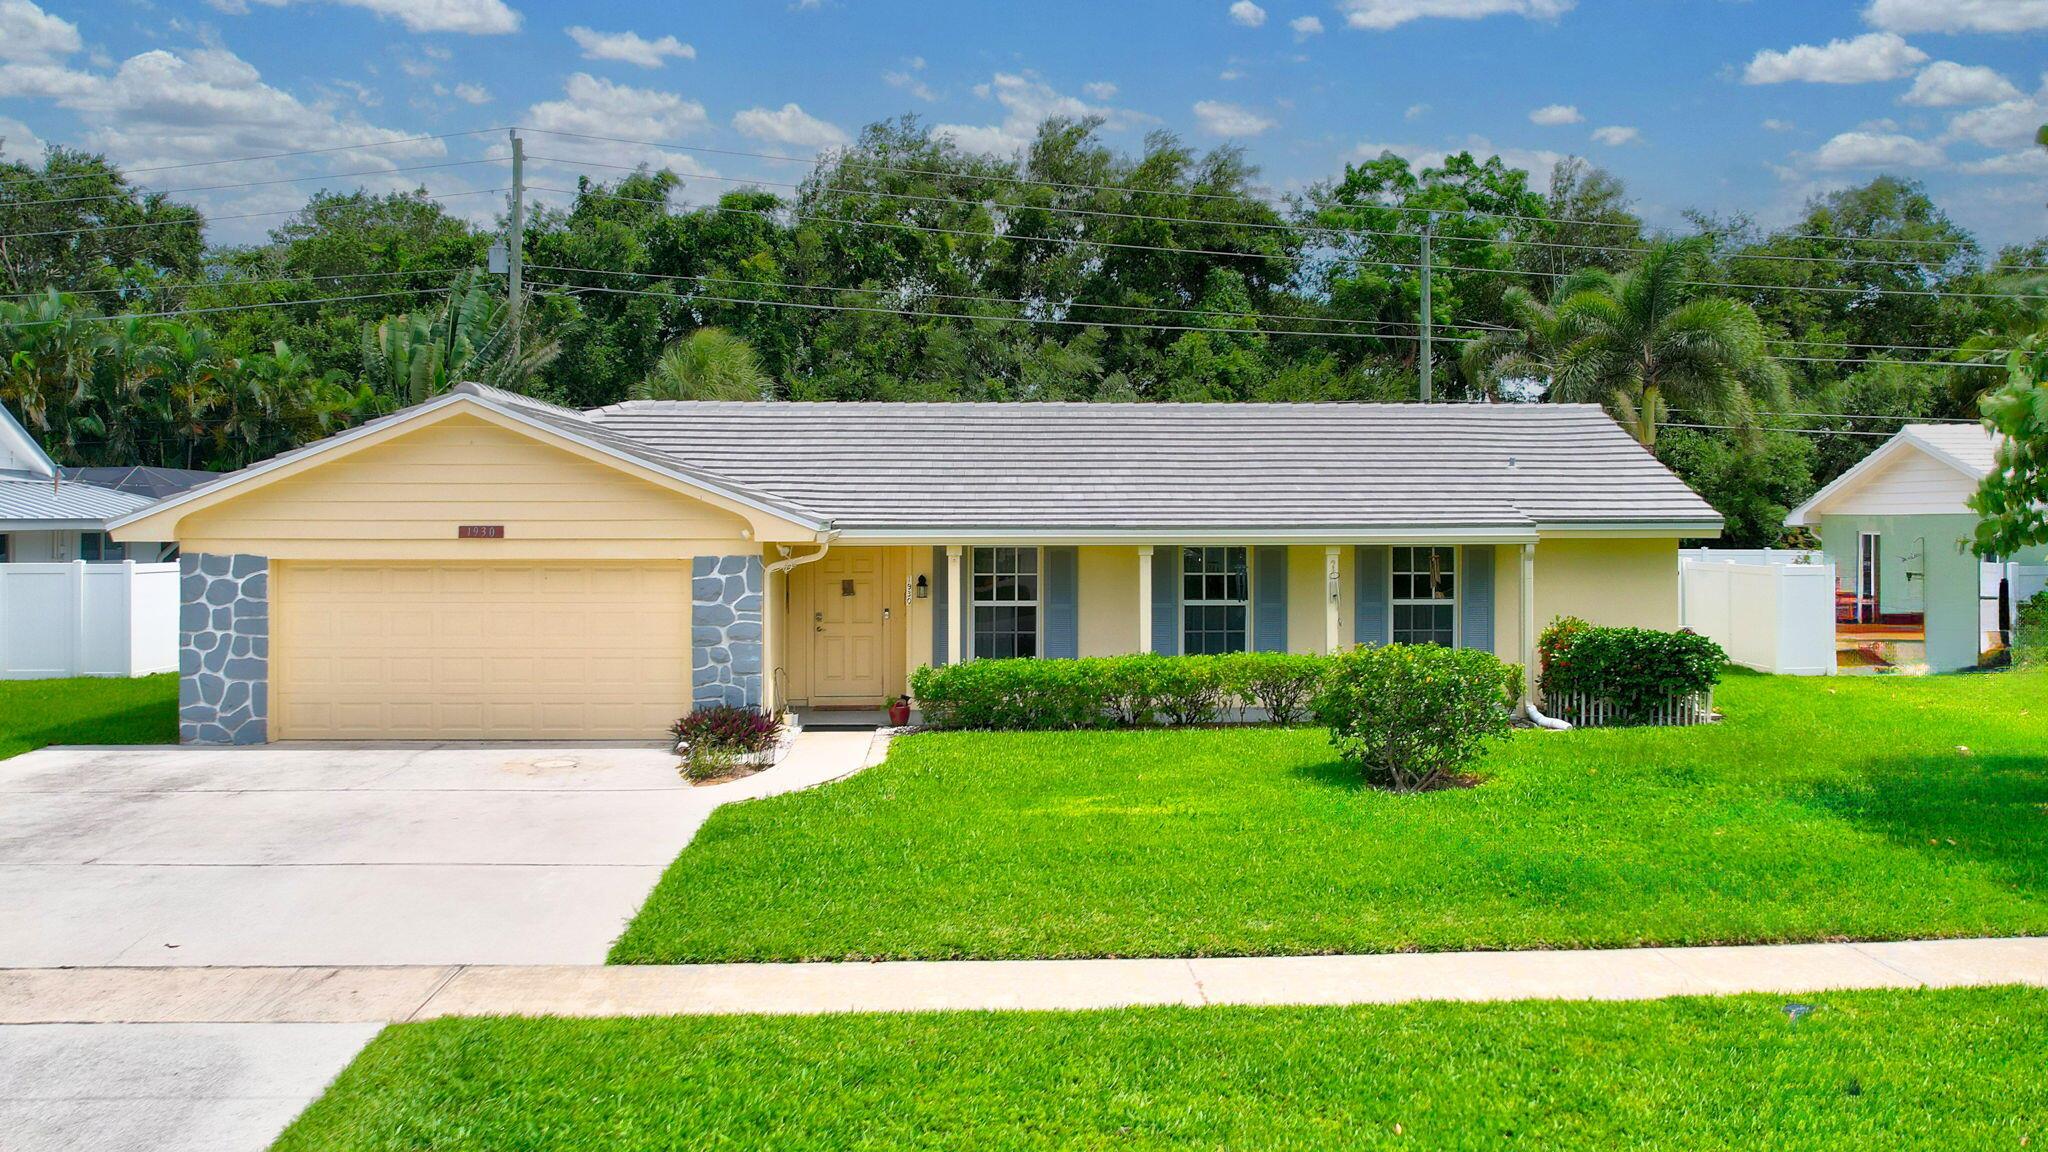 Fantastic one-story 3 bedroom 2 bath 2 car garage home in Juno Isles!  NEW ROOF MAY 2024, NEW AC JULY 2023, ALL HURRICANE IMPACT WINDOWS 2016, HURRICANE IMPACT FRENCH DOORS 2021, NEW PVC FENCE 2023.  NEW EXTERIOR PAINT 2024. Great lot that backs up to FPL parking area with green space buffer (no neighbors behind you).  Large back yard with room for a pool.    Zoned for North Palm Beach Conservatory School. 1.8 mile walk to the beach, or a short bike ride.  1 mile to Bert Winters Park or .6 mile to Juno Park boat ramps and baseball fields.  Close to I95, turnpike, 20 minutes to Palm Beach Airport.  Walk to work at FPL!  Come see it today!